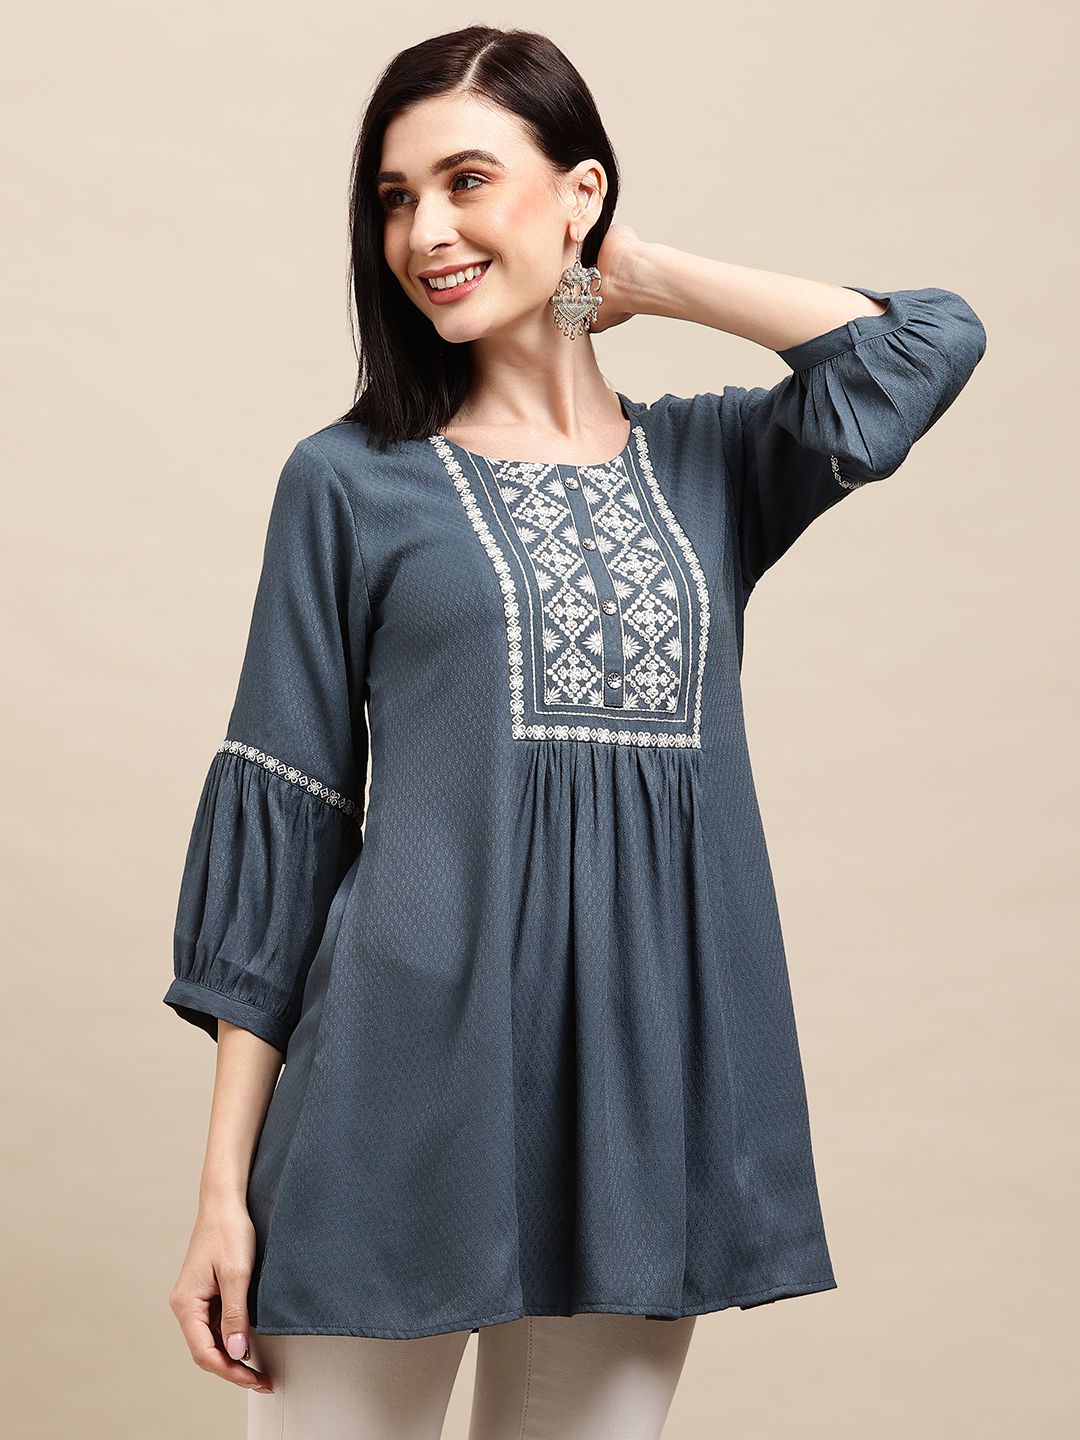 Grey Poly Rayon Floral Embroidered Top | Leemboodi